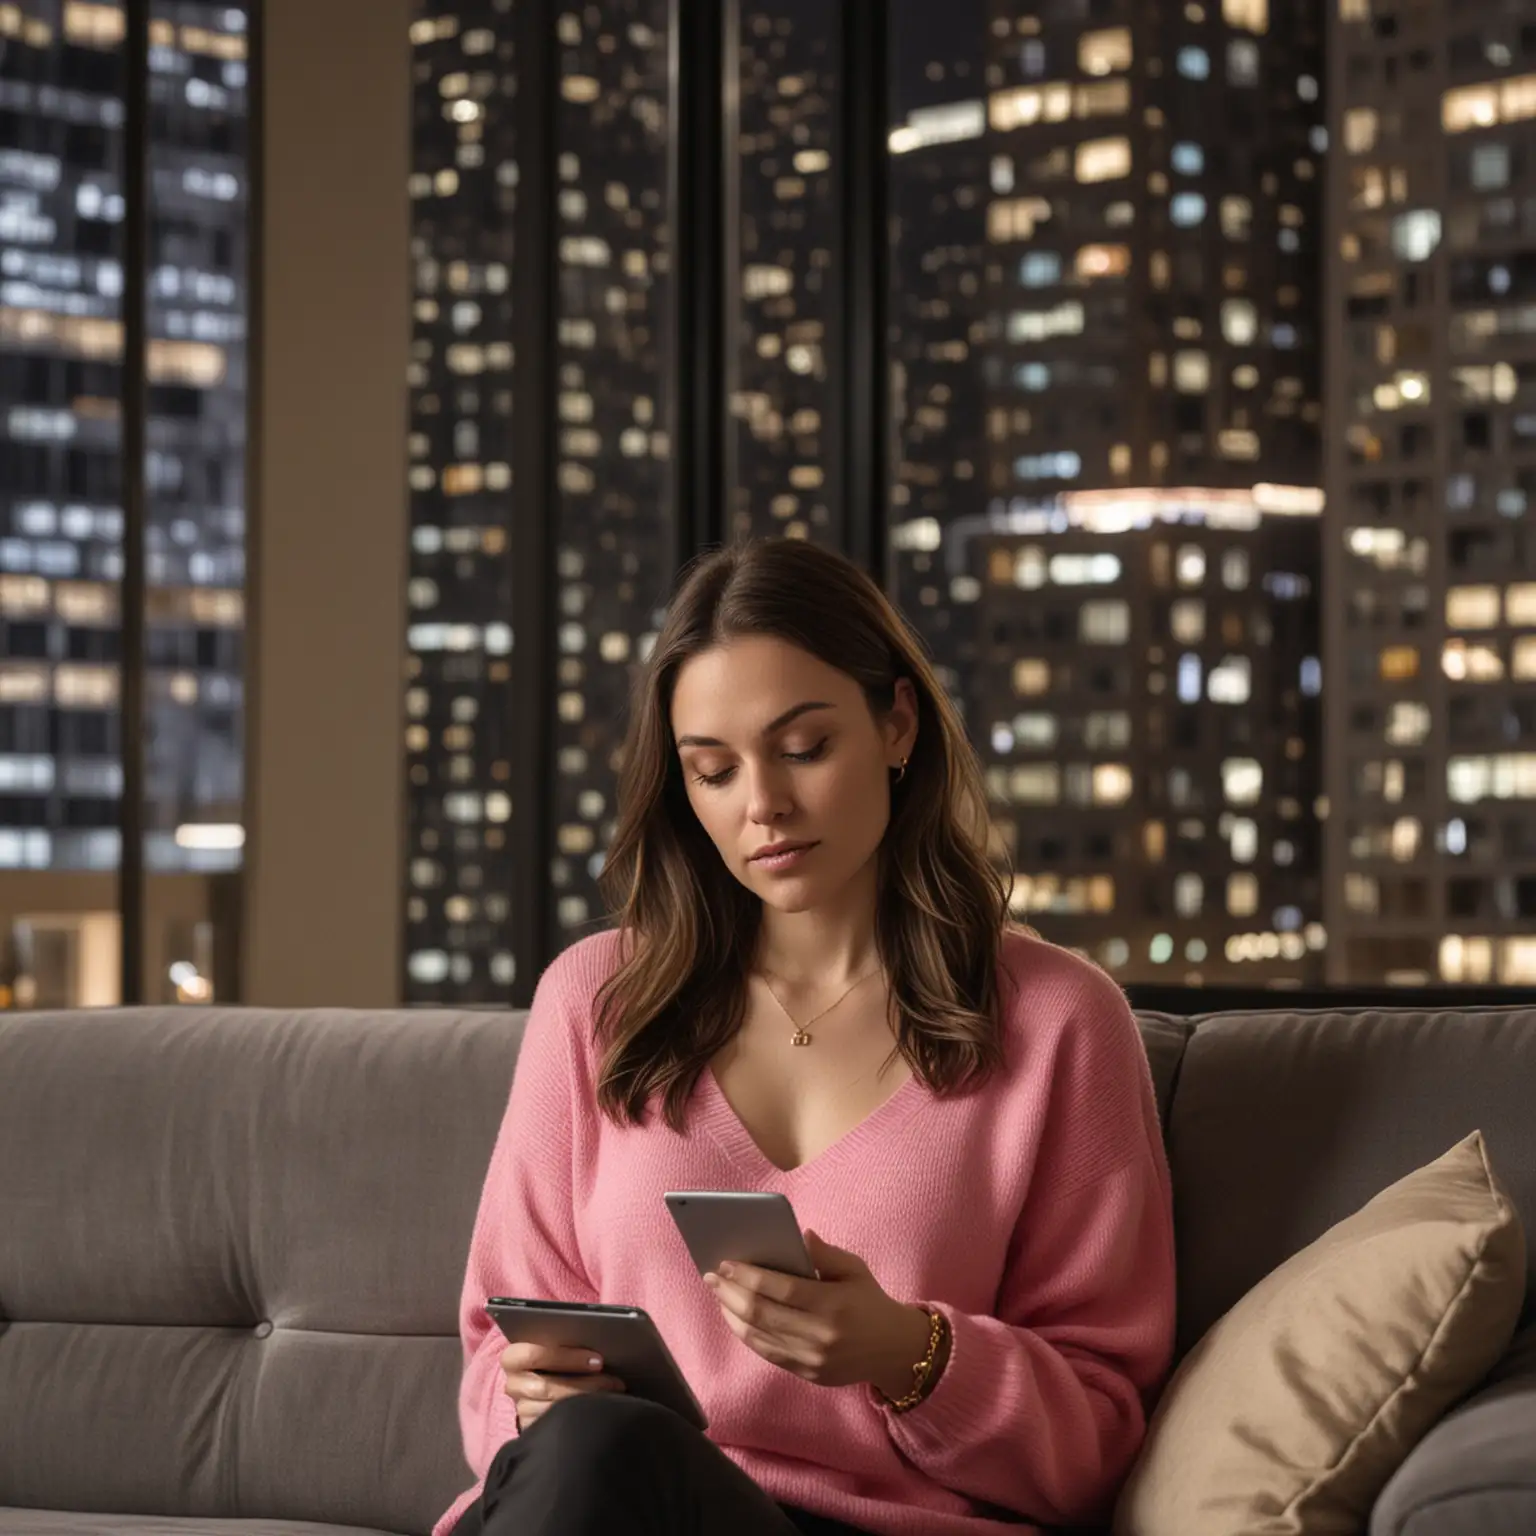 Pale Woman in Pink Sweater Reading Tablet in Modern Urban Apartment